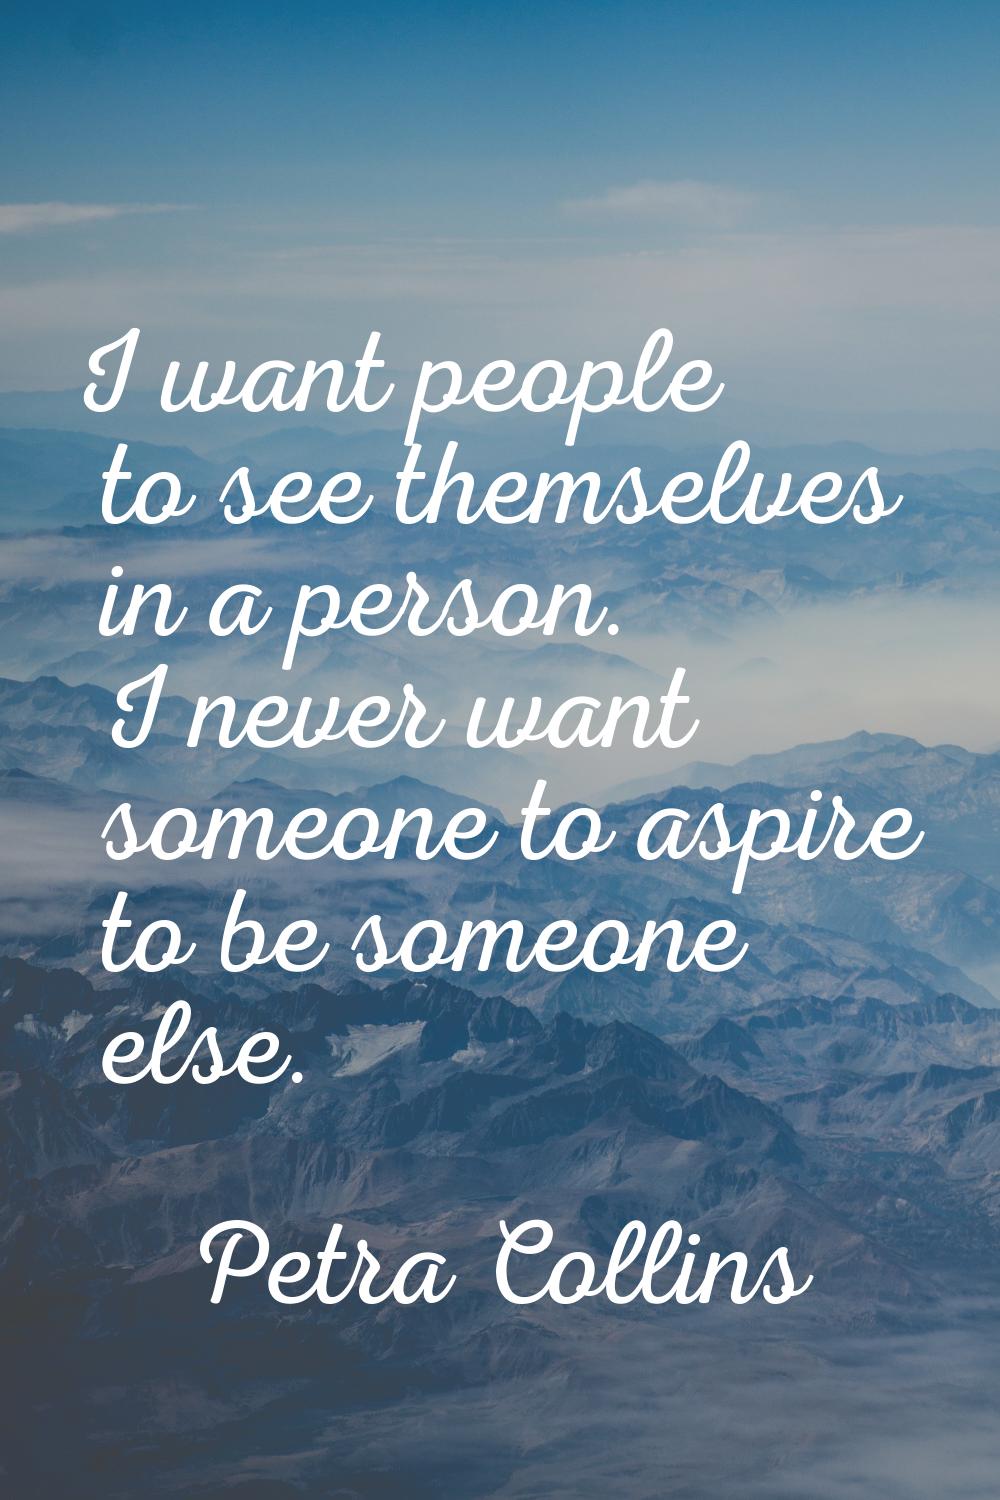 I want people to see themselves in a person. I never want someone to aspire to be someone else.